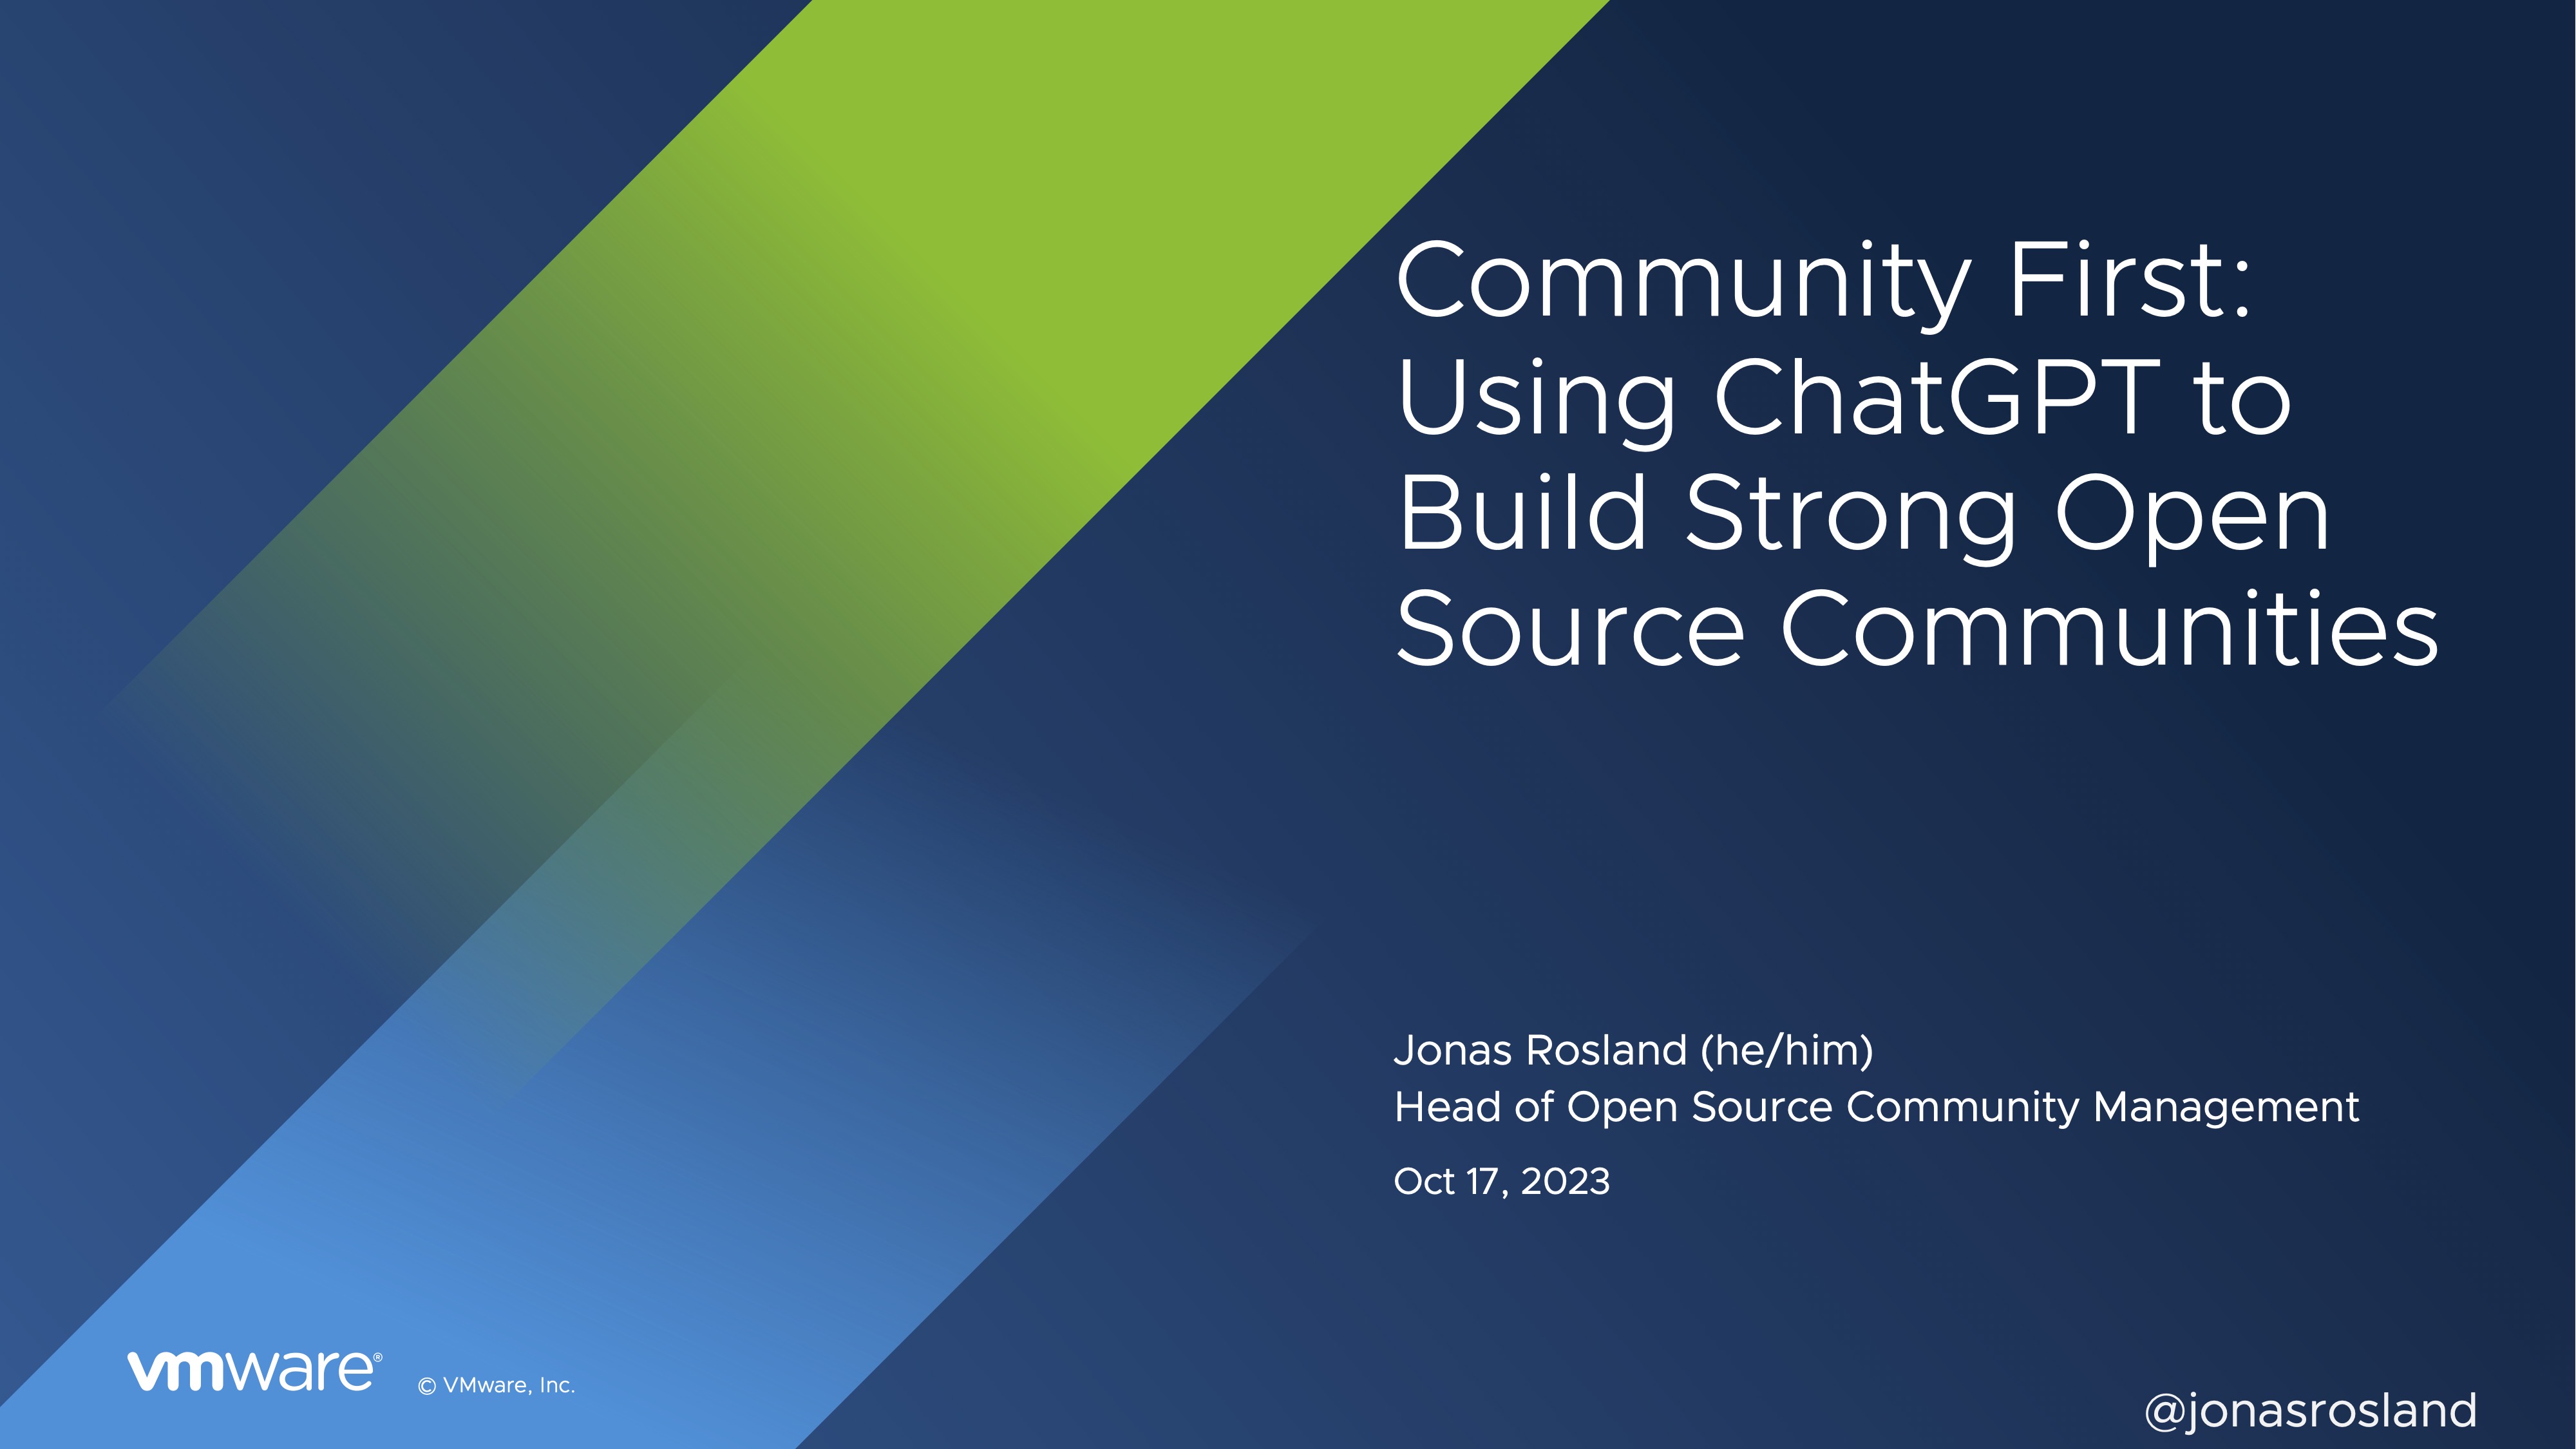 Community First: Using ChatGPT to Build Strong Open Source Communities presentation